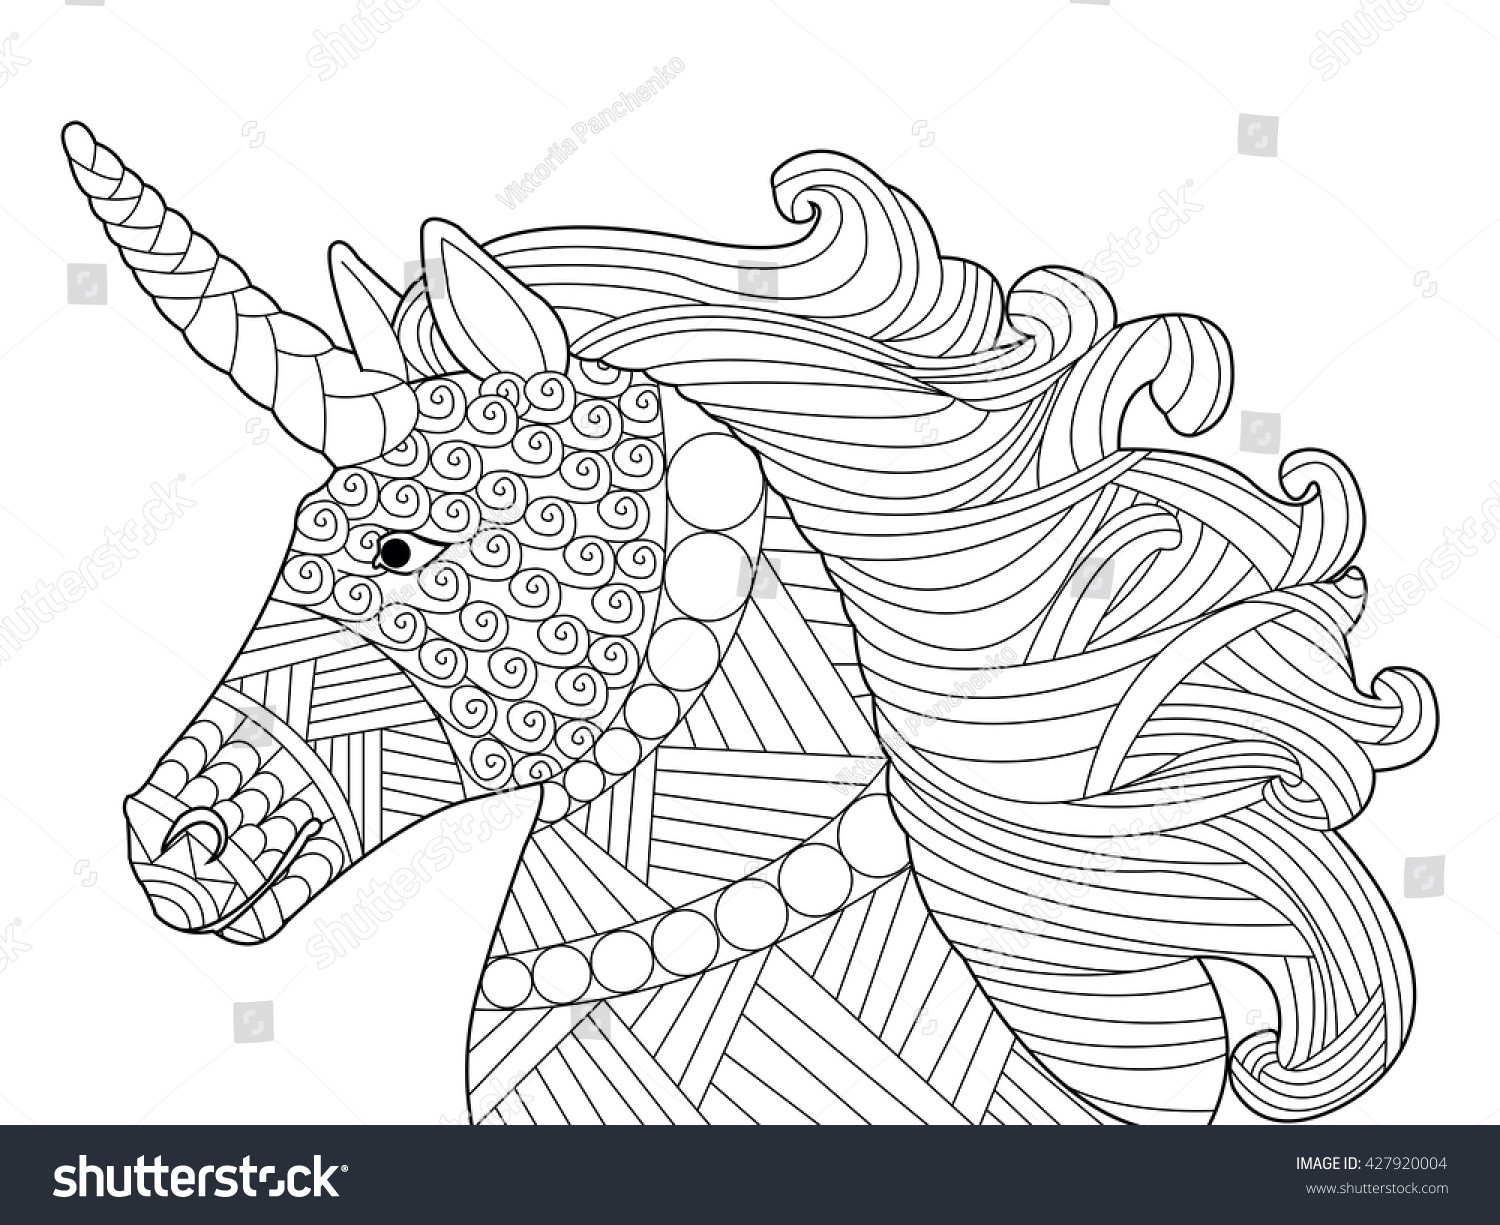 Unicorn Adult Coloring Book
 Head Unicorn Coloring Book Adults Vector Stock Vector